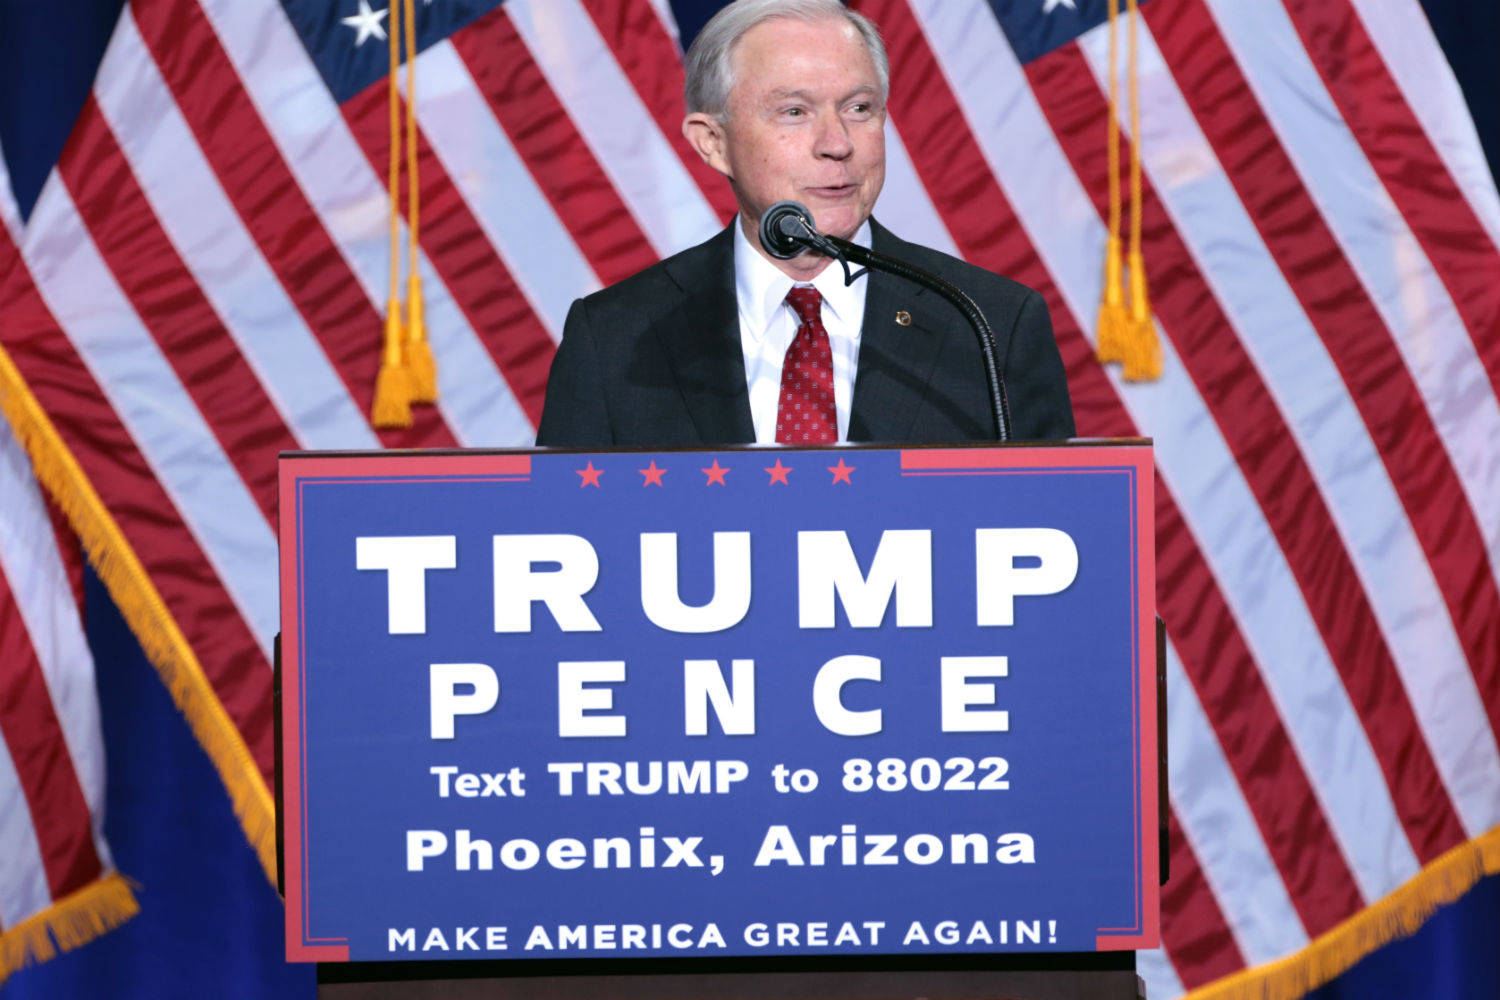 Jeff Sessions. Photo by Gage Skidmore/Wikipedia